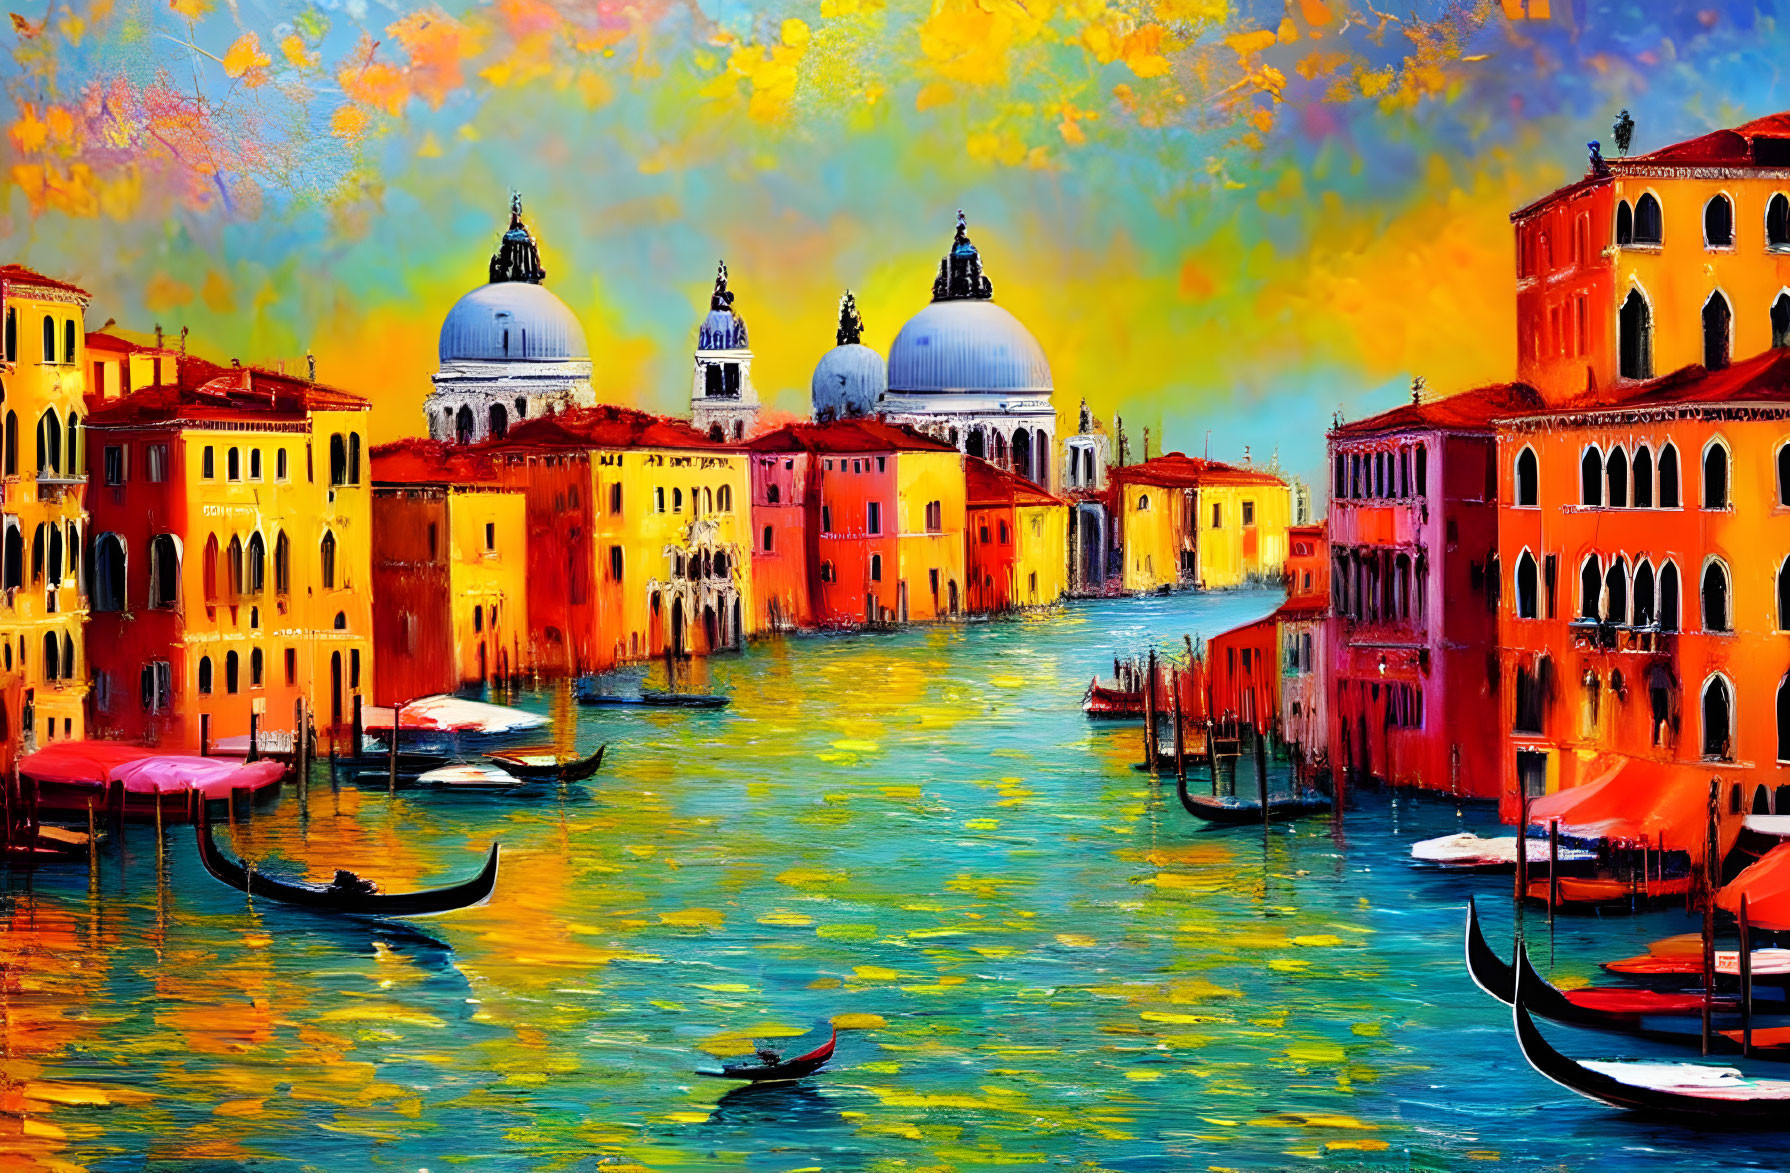 Impressionist-style painting of colorful Venice canal at sunset